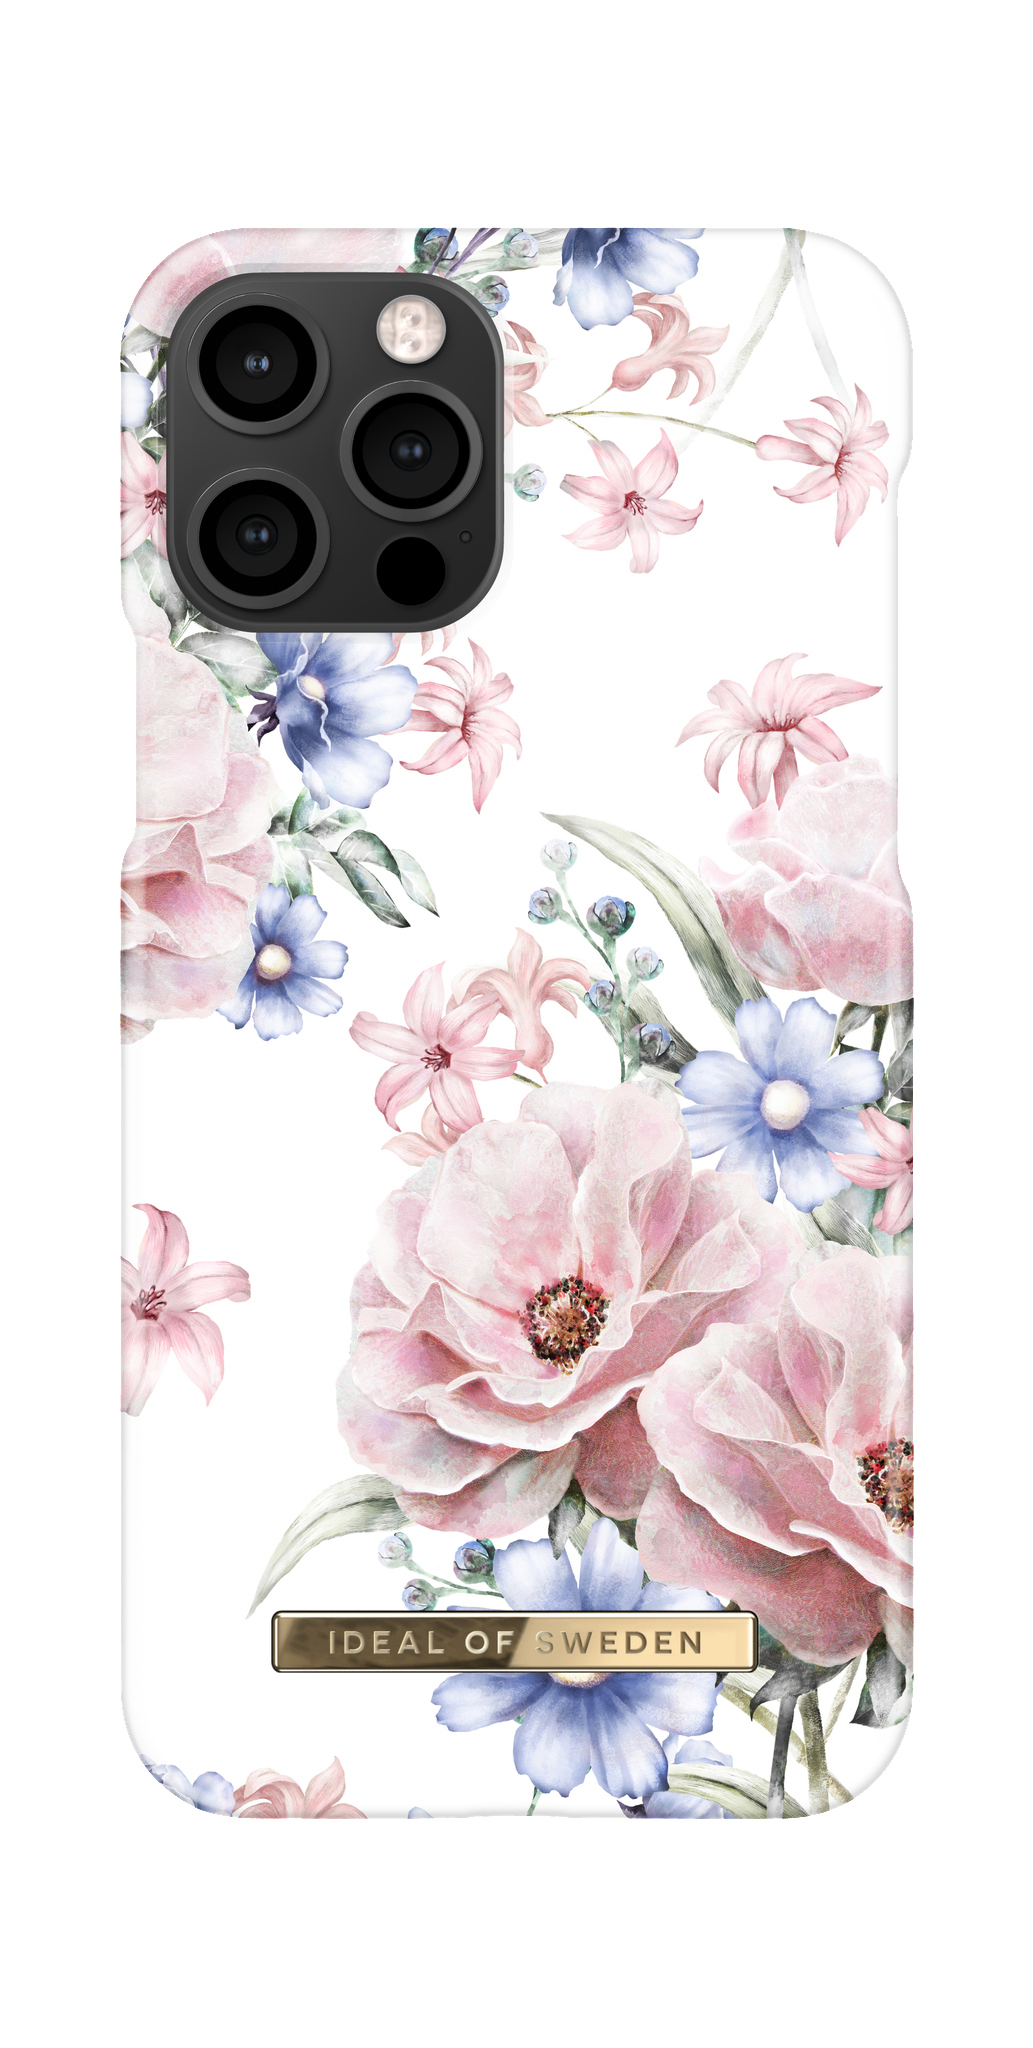 IDEAL OF SWEDEN iPhone 12 iPhone Case, Apple, 12, Romance Backcover, Floral Pro, Fashion